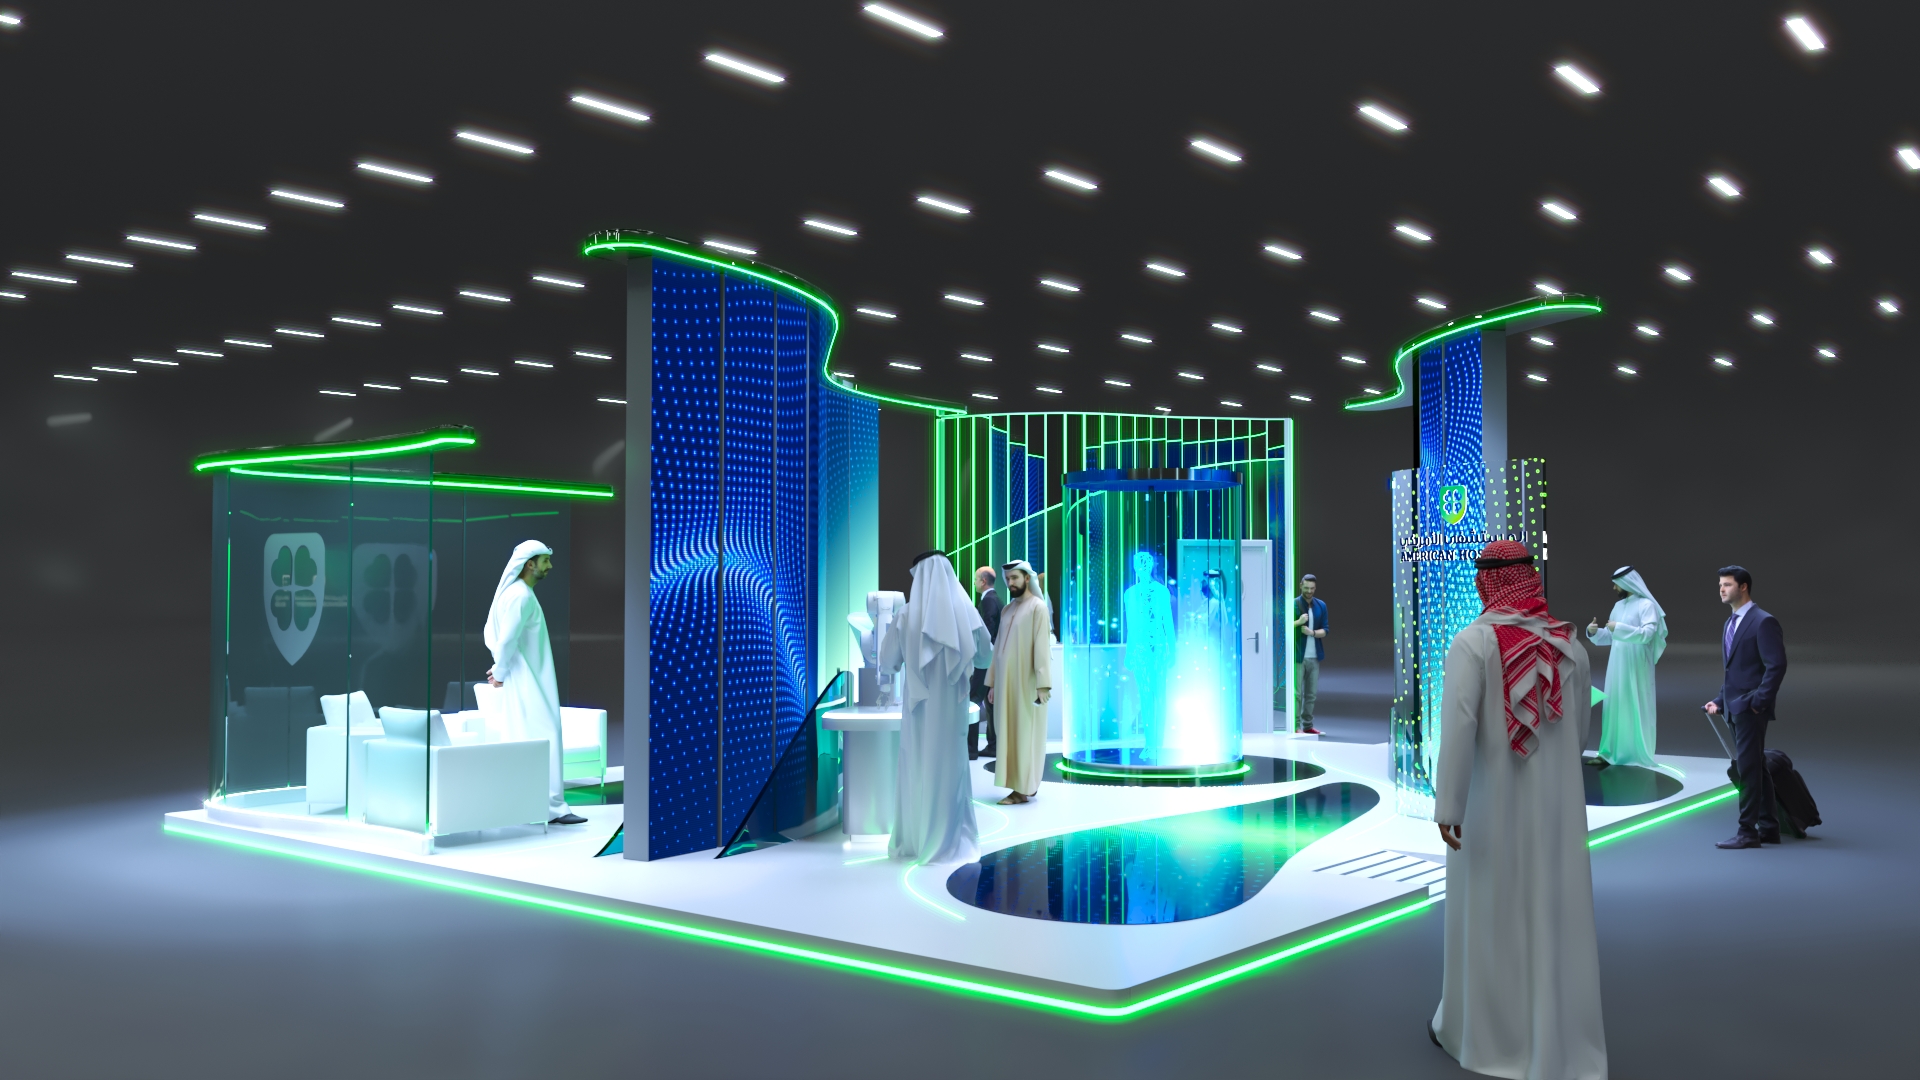 The hospital once again raises the bar in healthcare industry with its innovations and solutions displayed at its futuristic stand at Arab Health 2023